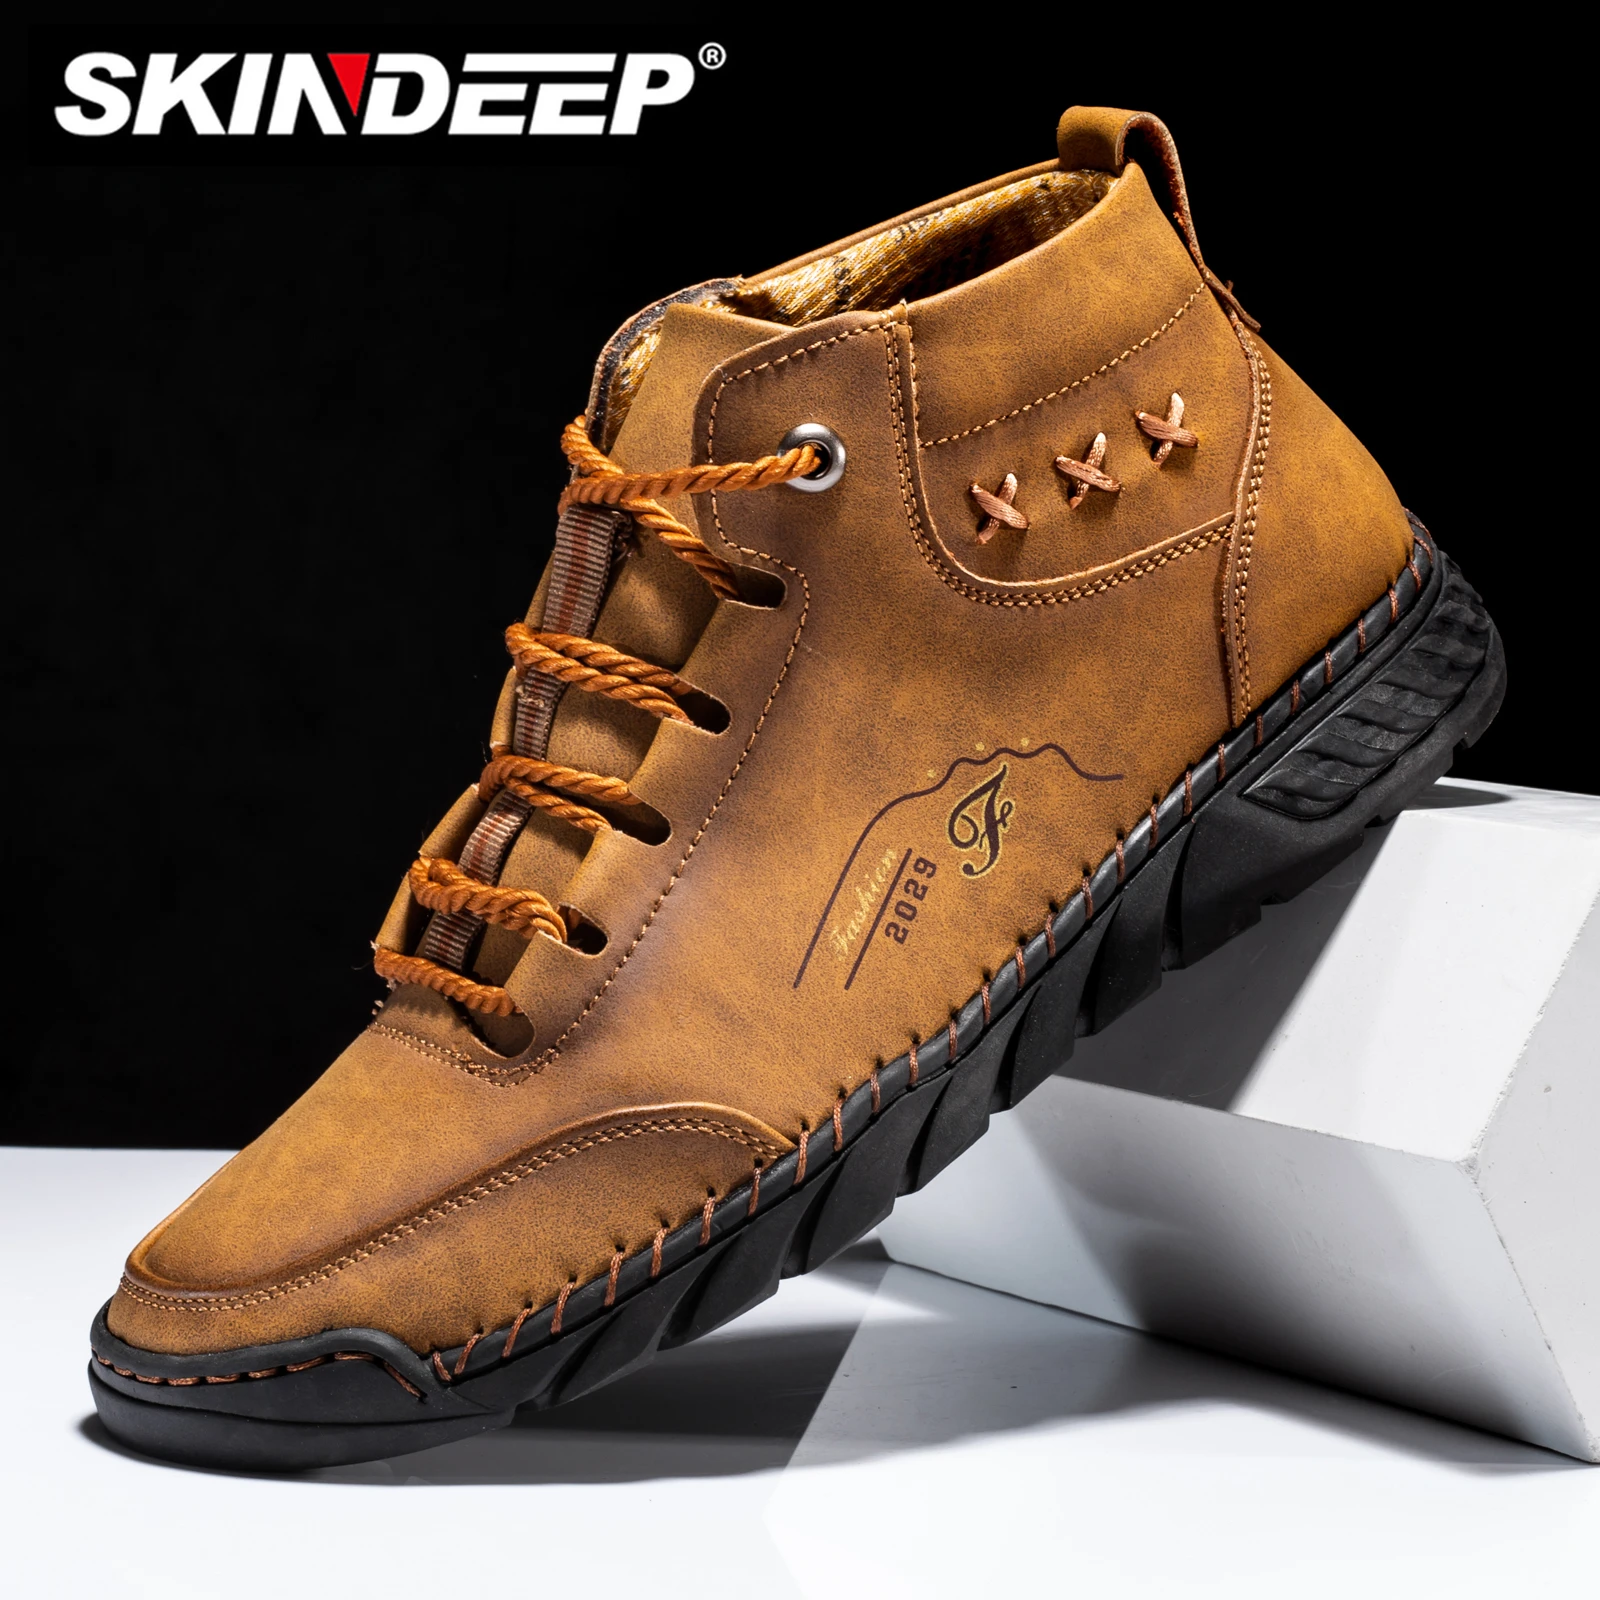 

SKINDEEP Handmade Leather Casual Men Shoes Ankle Boots Men Loafers Comfort Walking Shoes Men Flats Hot Sale Moccasins Shoes